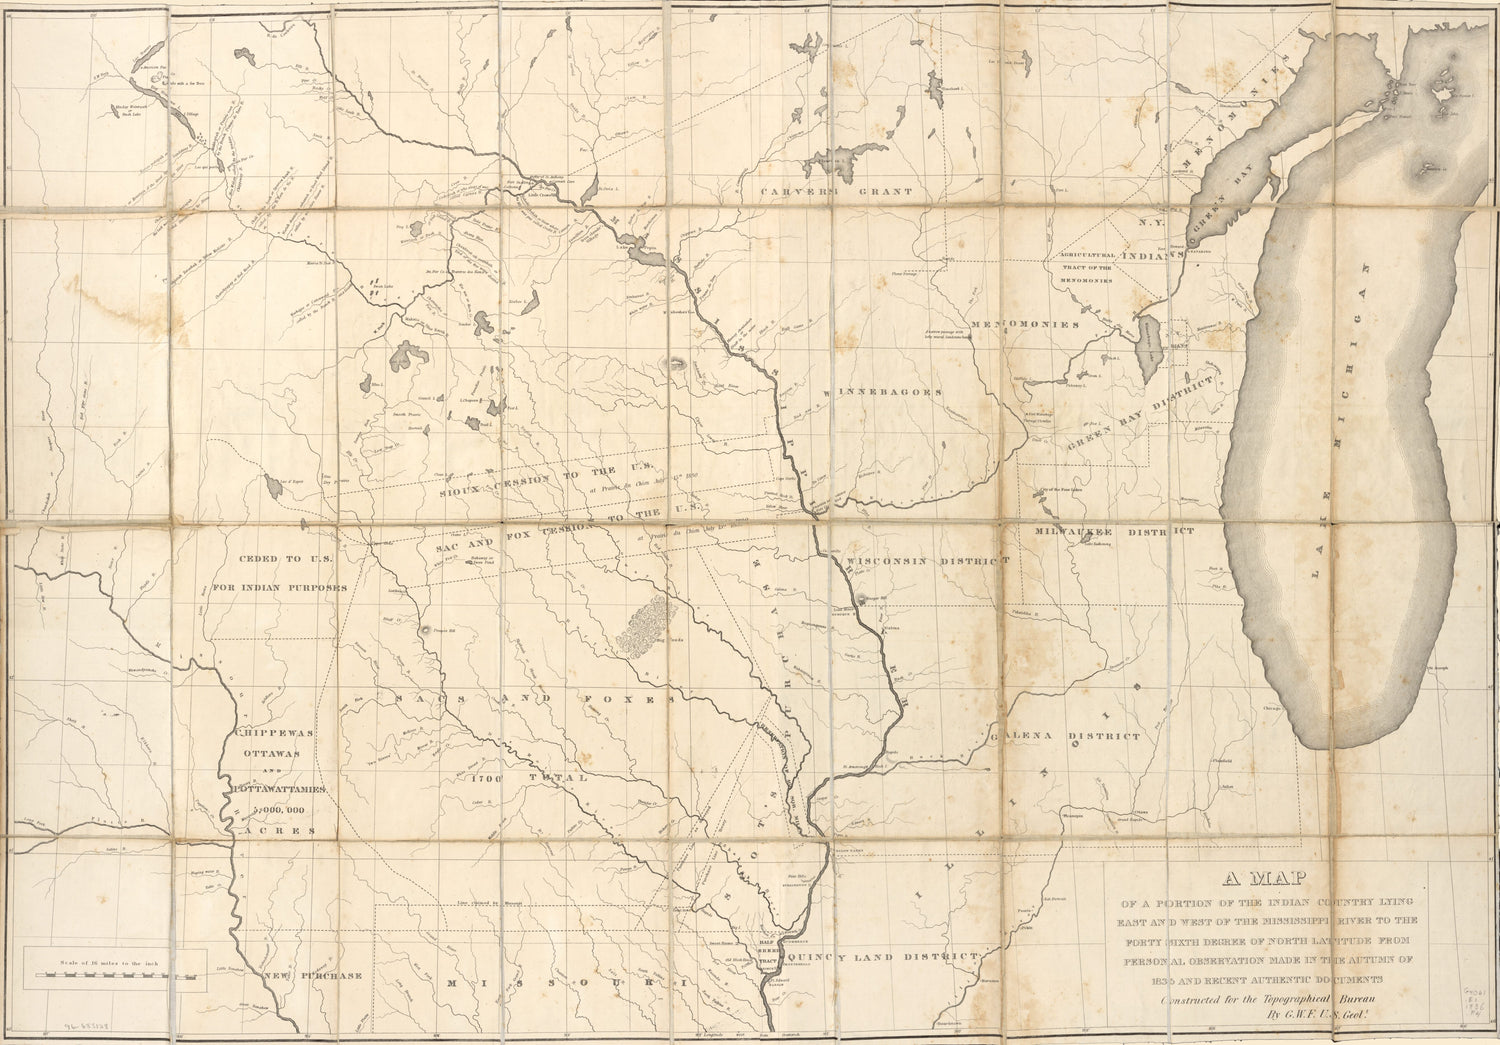 This old map of A Map of a Portion of the Indian Country Lying East and West of the Mississippi River to the Forty Sixth Degree of North Latitude from Personal Observation Made In the Autumn of 1835 and Recent Authentic Documents (Geological Report of an